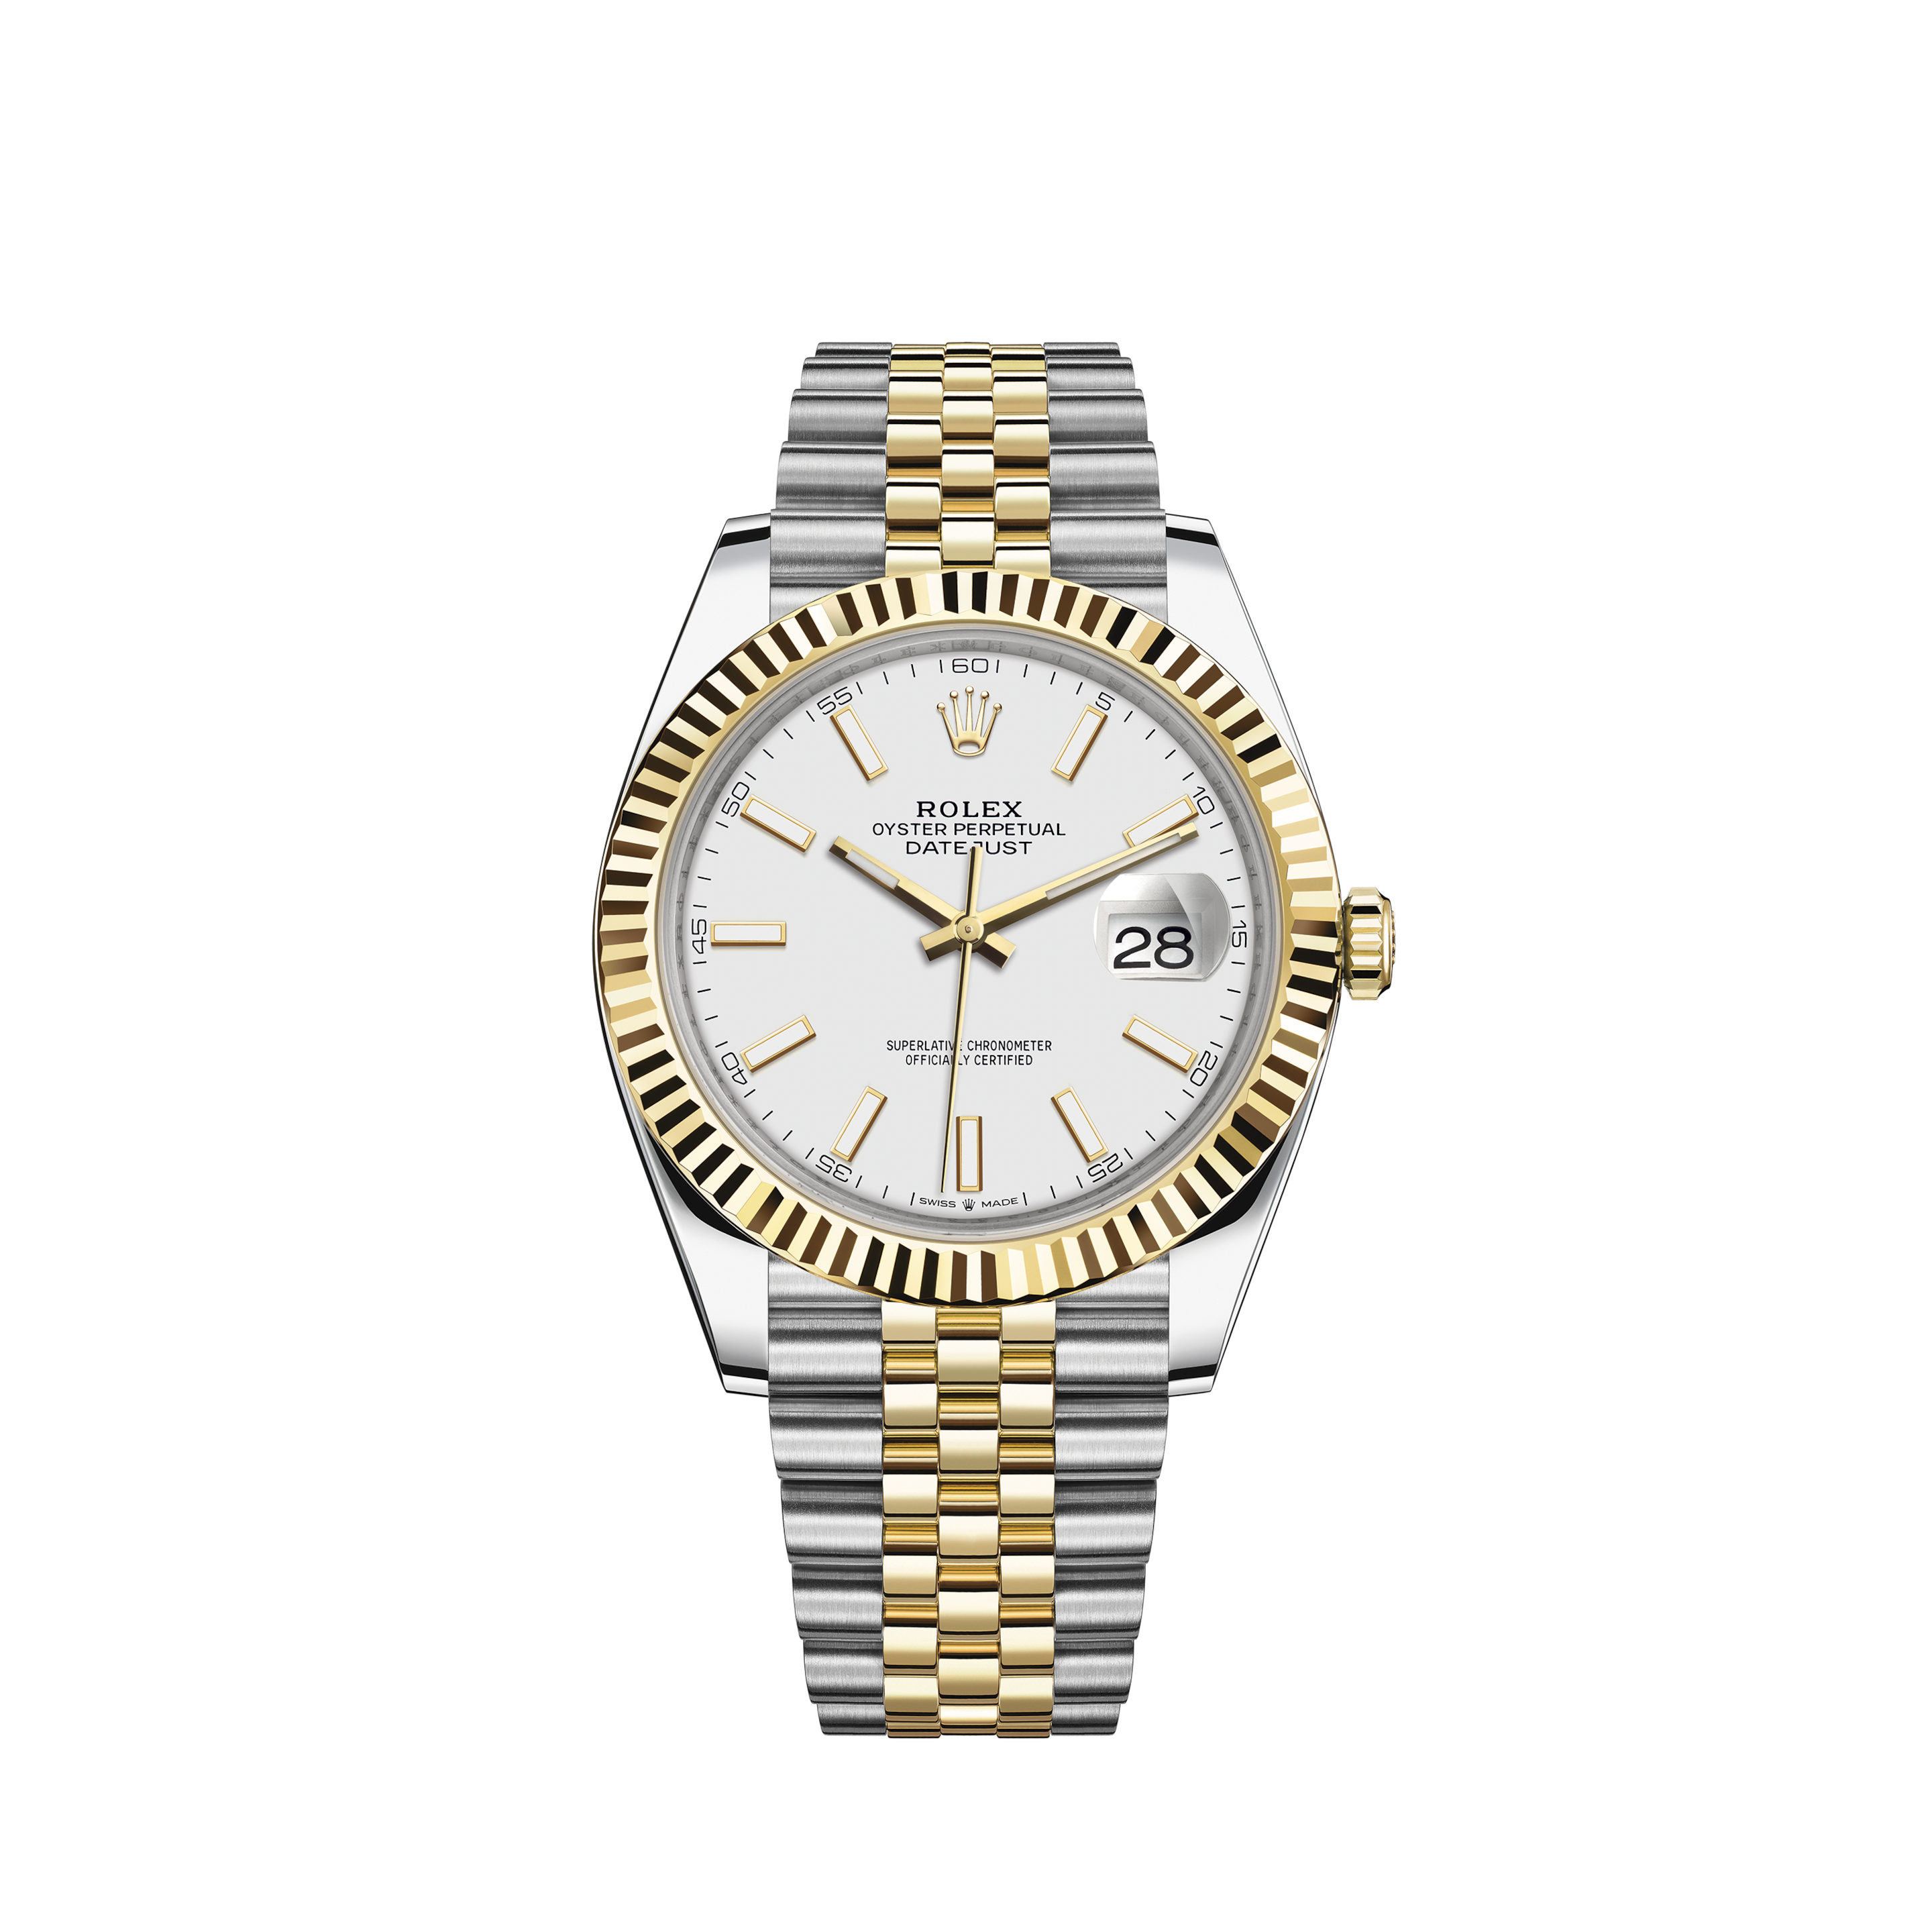 Rolex 31mm Datejust With custom Diamond bezel SS Salmon Color Dial Bezel and Lugs with Diamond Accent RT Deployment buckleRolex 31mm Datejust With custom Diamond bezel SS Salmon Color Dial with Diamond Accent RT Deployment buckle